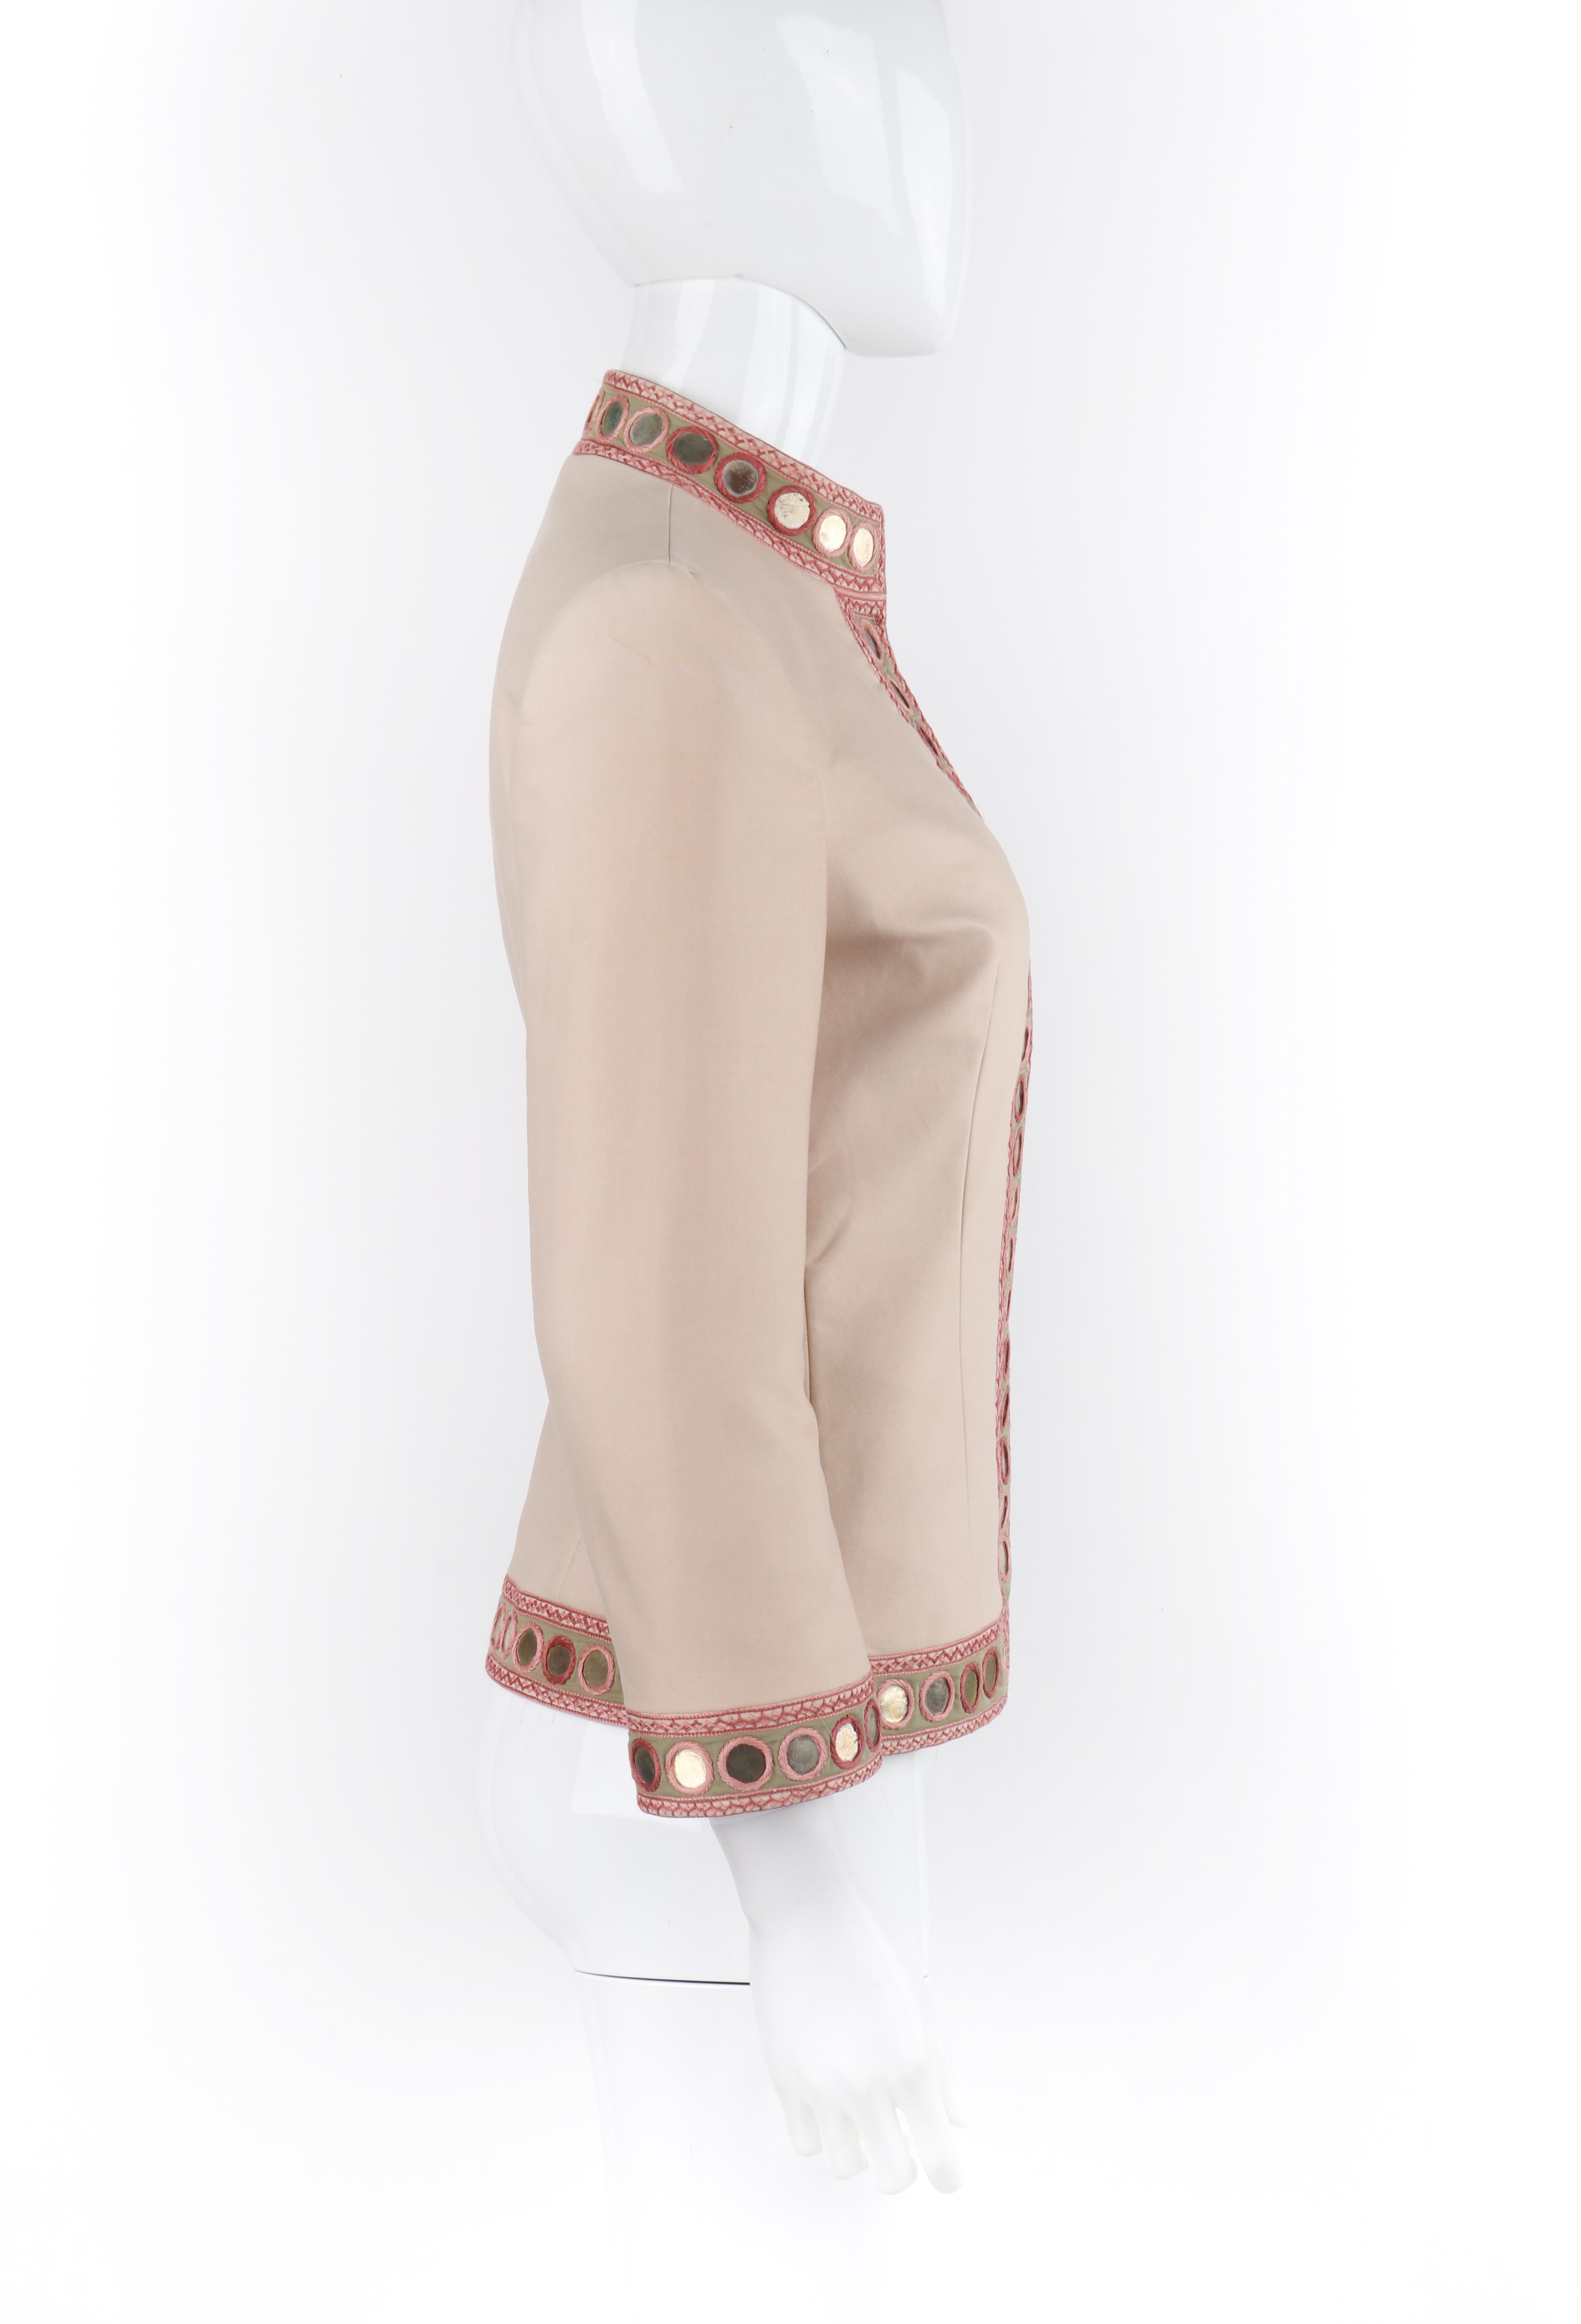 ALEXANDER McQUEEN S/S 2005 Beige Gold Coin Embroidered Collared Button Up Jacket For Sale 1